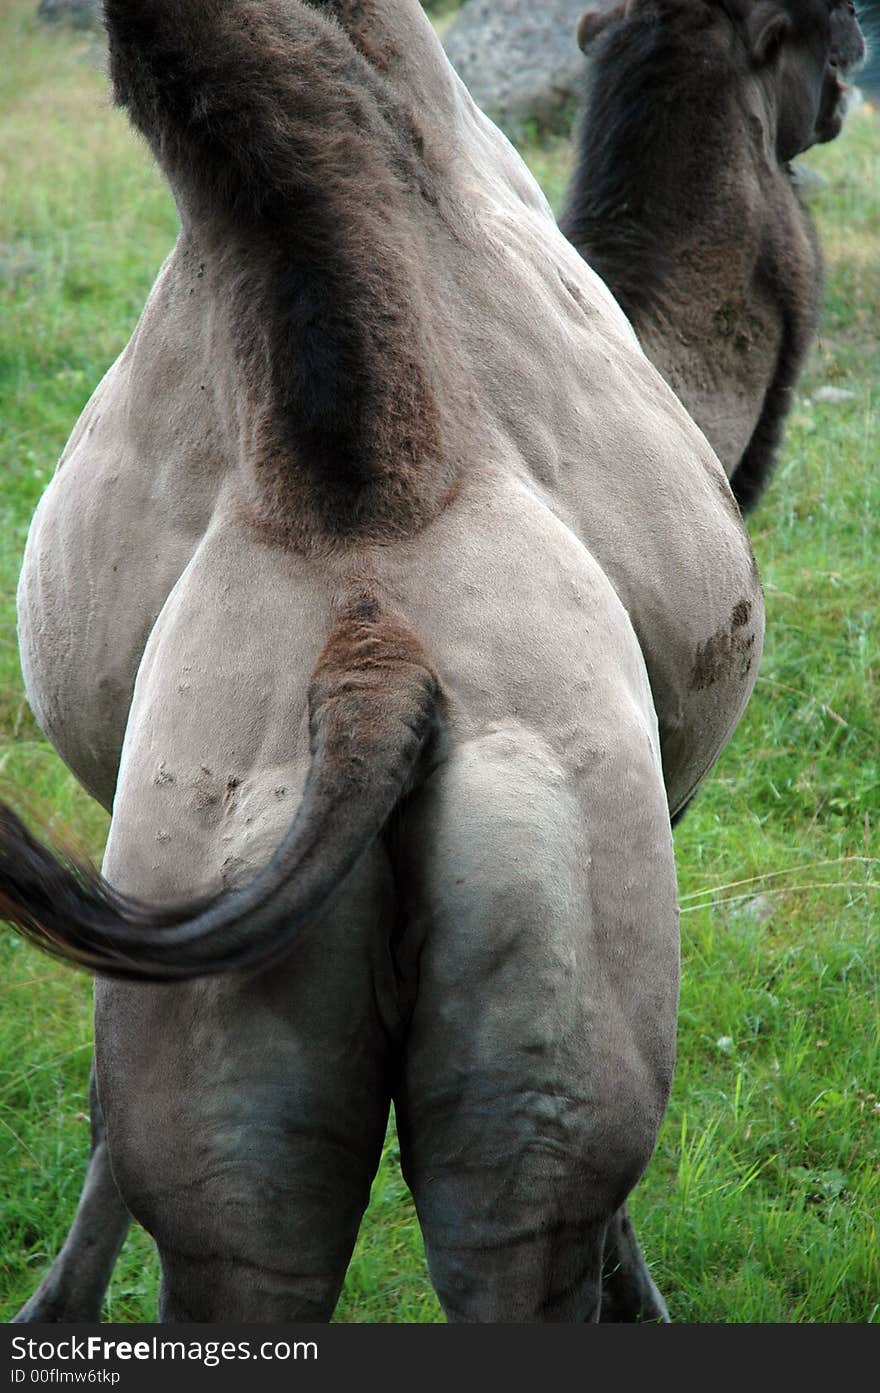 A camels bottom makes a funny picture. A camels bottom makes a funny picture